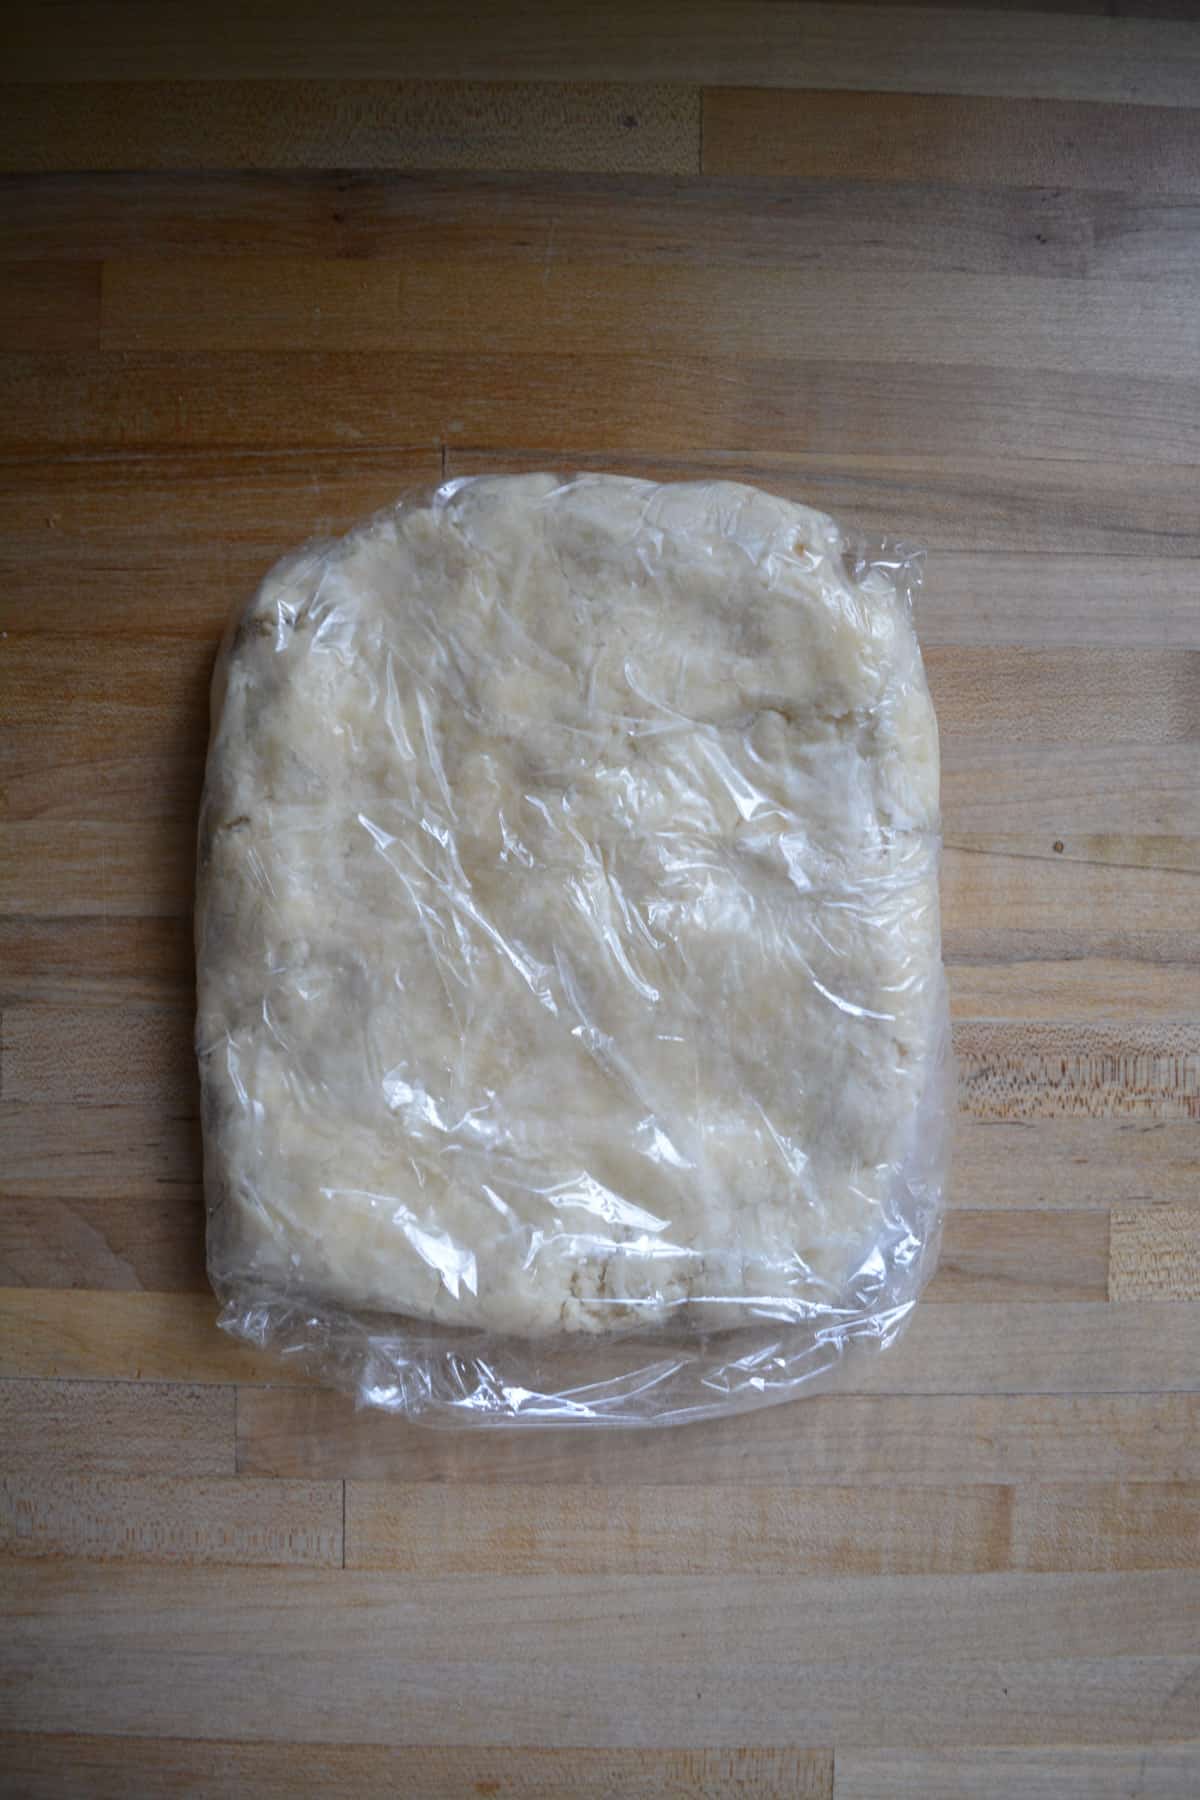 Pie dough flattened into a disc and wrapped in plastic wrap.